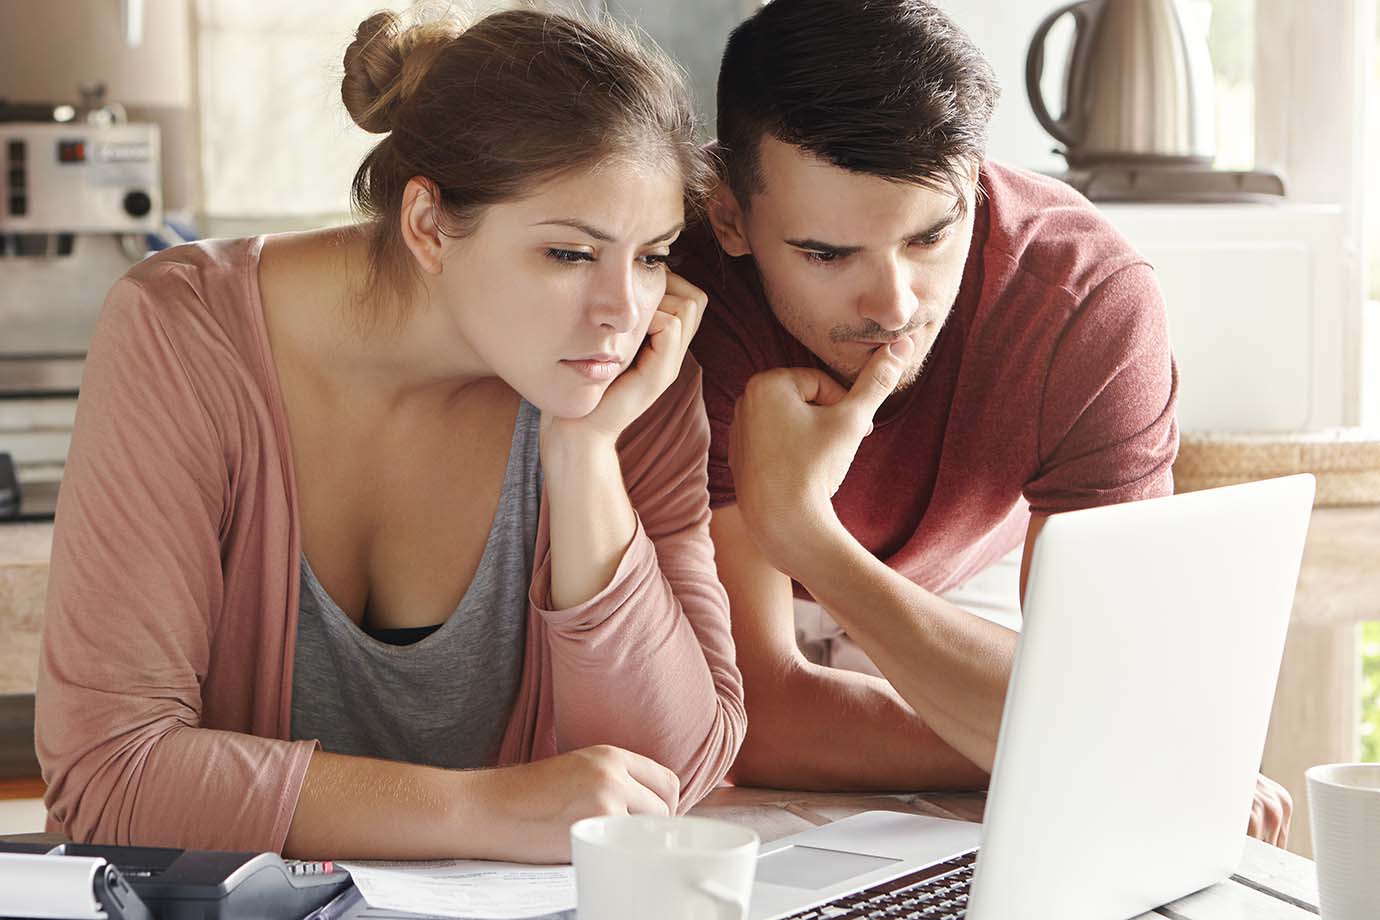 Young man and woman looking at a laptop screen